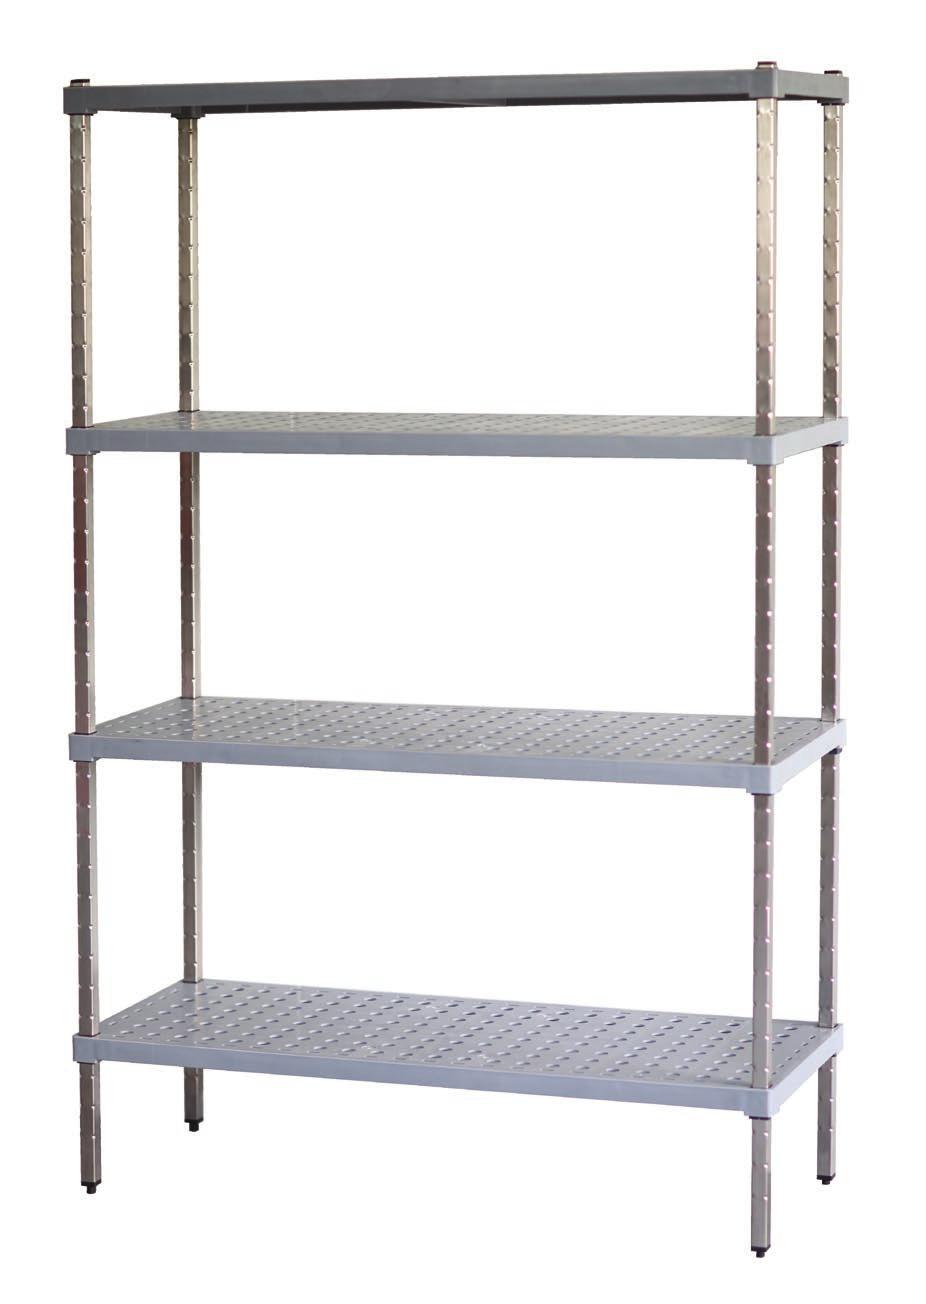 SHELVING M-SPAN Shelving The all new M-Span shelf is designed to be easy to clean and